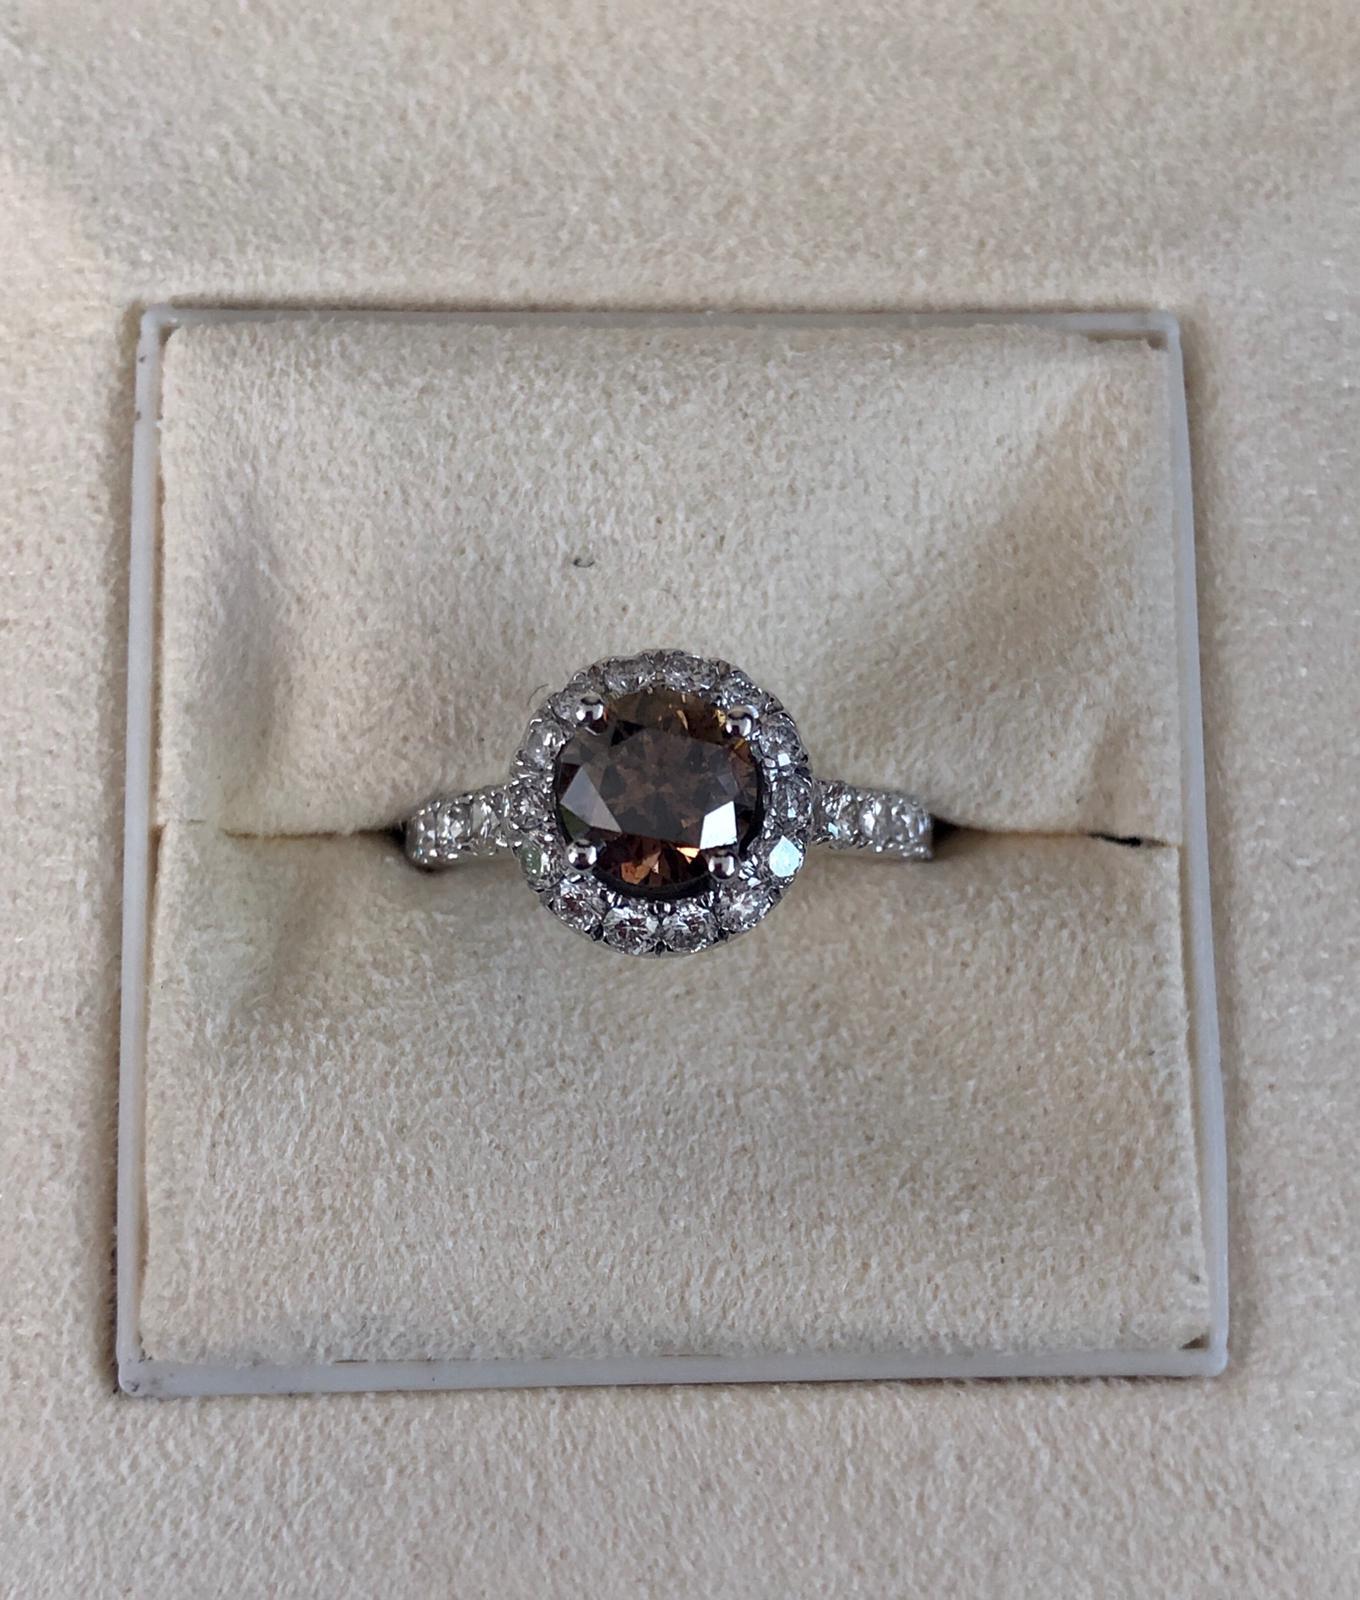 Fancy Dark Brown-Greenish Yellow natural round diamond weighing 2.50 carats by GIA.  Half way paved white diamonds in the halo setting. Its transparency and luster are excellent. set on 18K white gold, this ring is the ultimate gift for